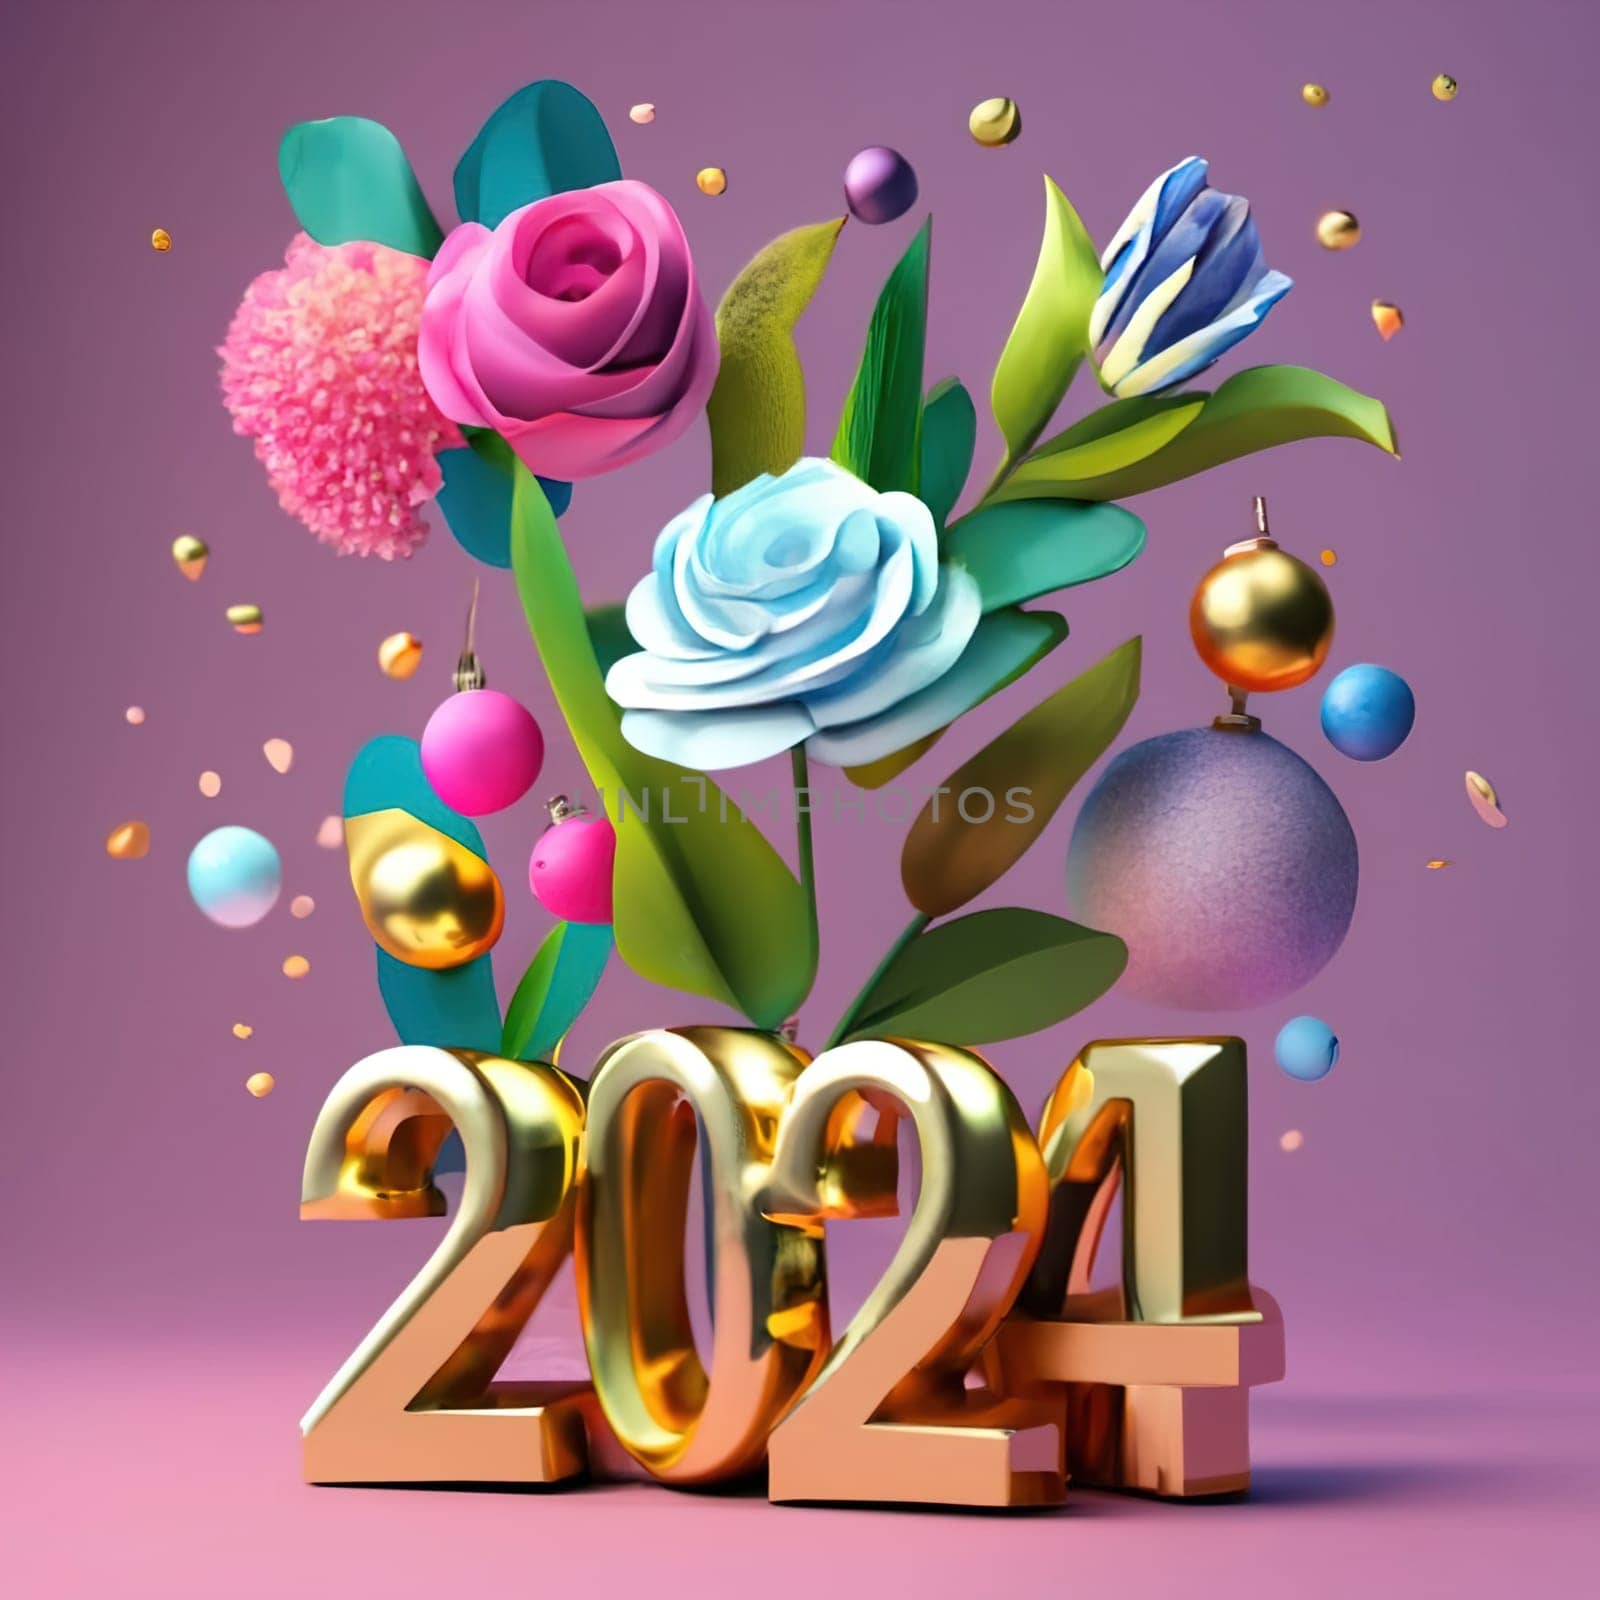 2024 Happy New Year Greeting Card - Vibrant Gold Conceptual Art in 3D Render with Stylish Typography and Fashion Illustration download image